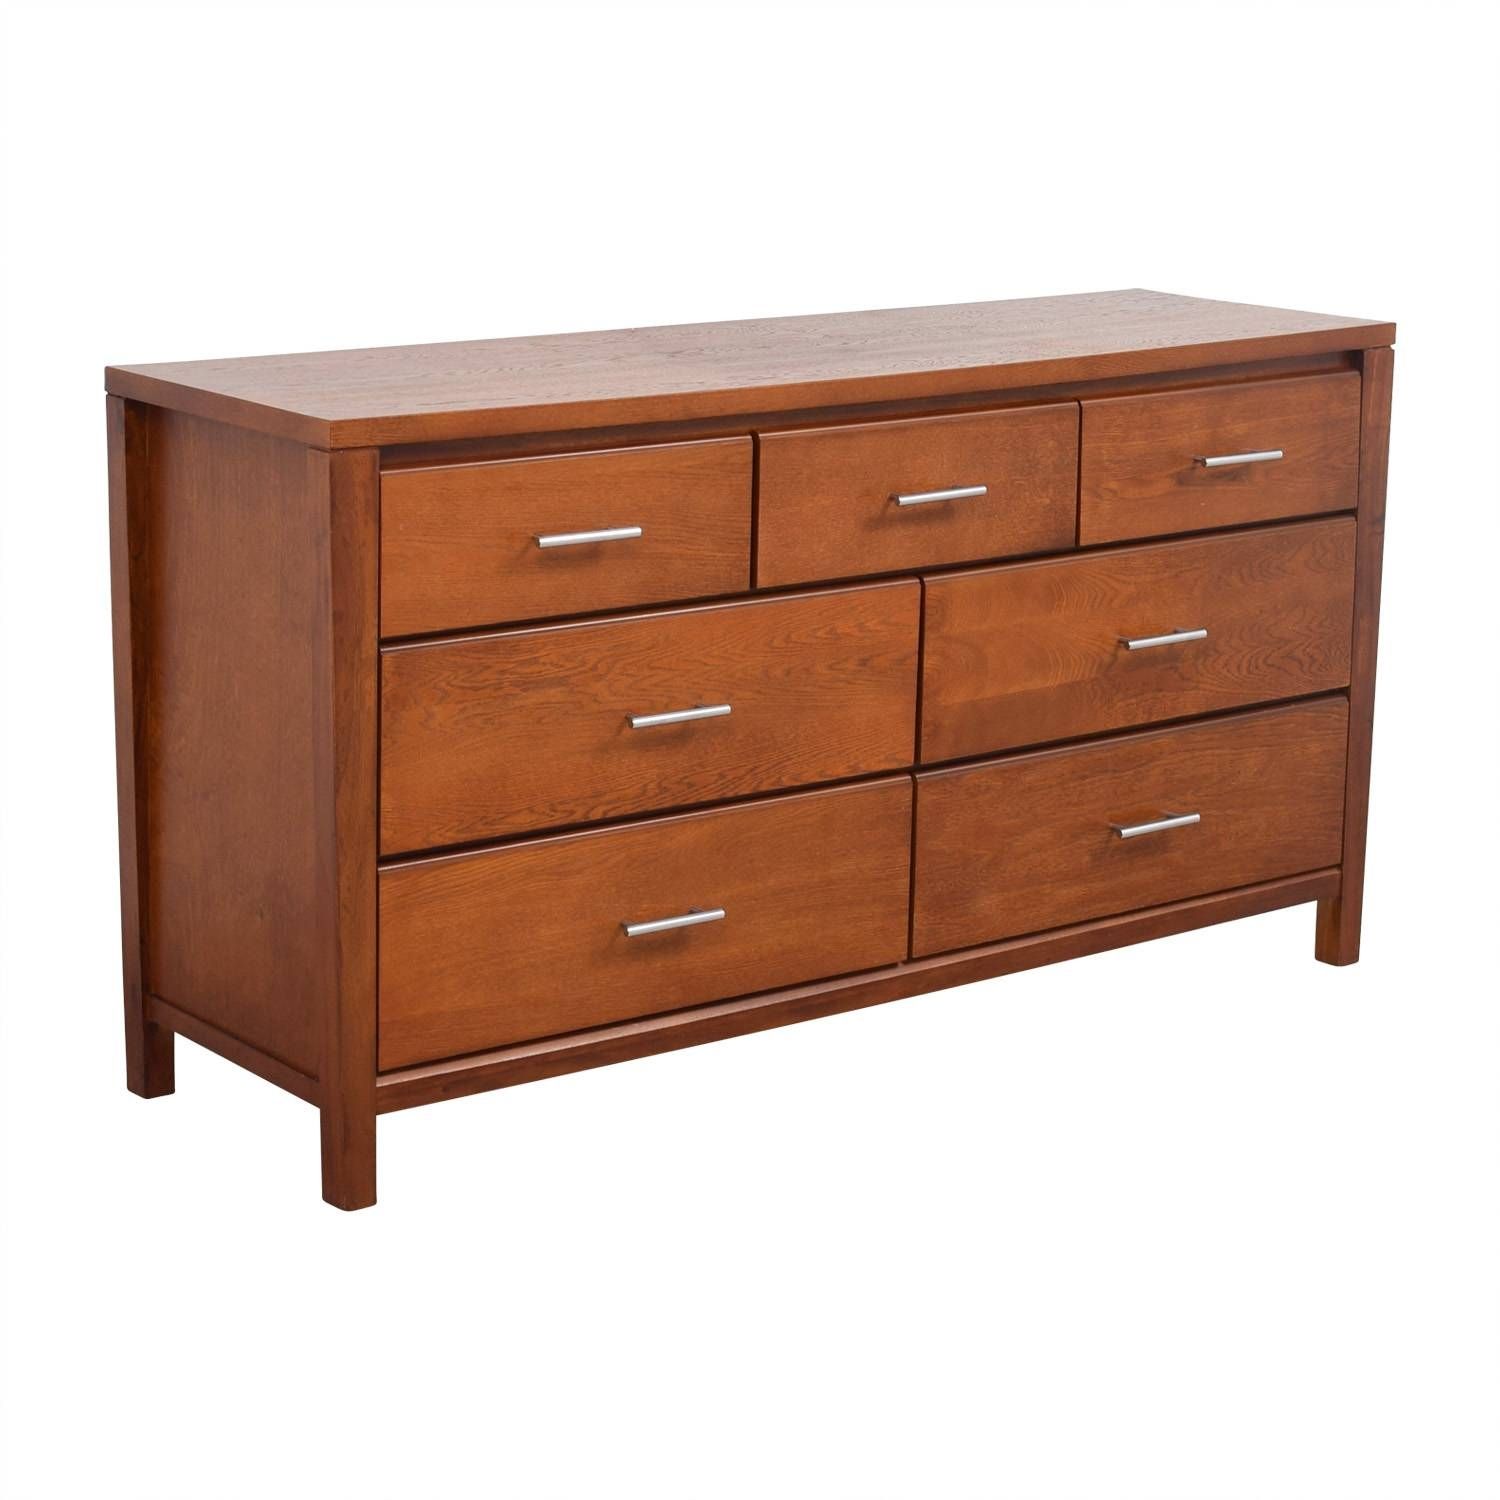 64% Off – Modern Seven Drawer Dresser / Storage Throughout Most Recent Second Hand Dressers And Sideboards (View 6 of 15)